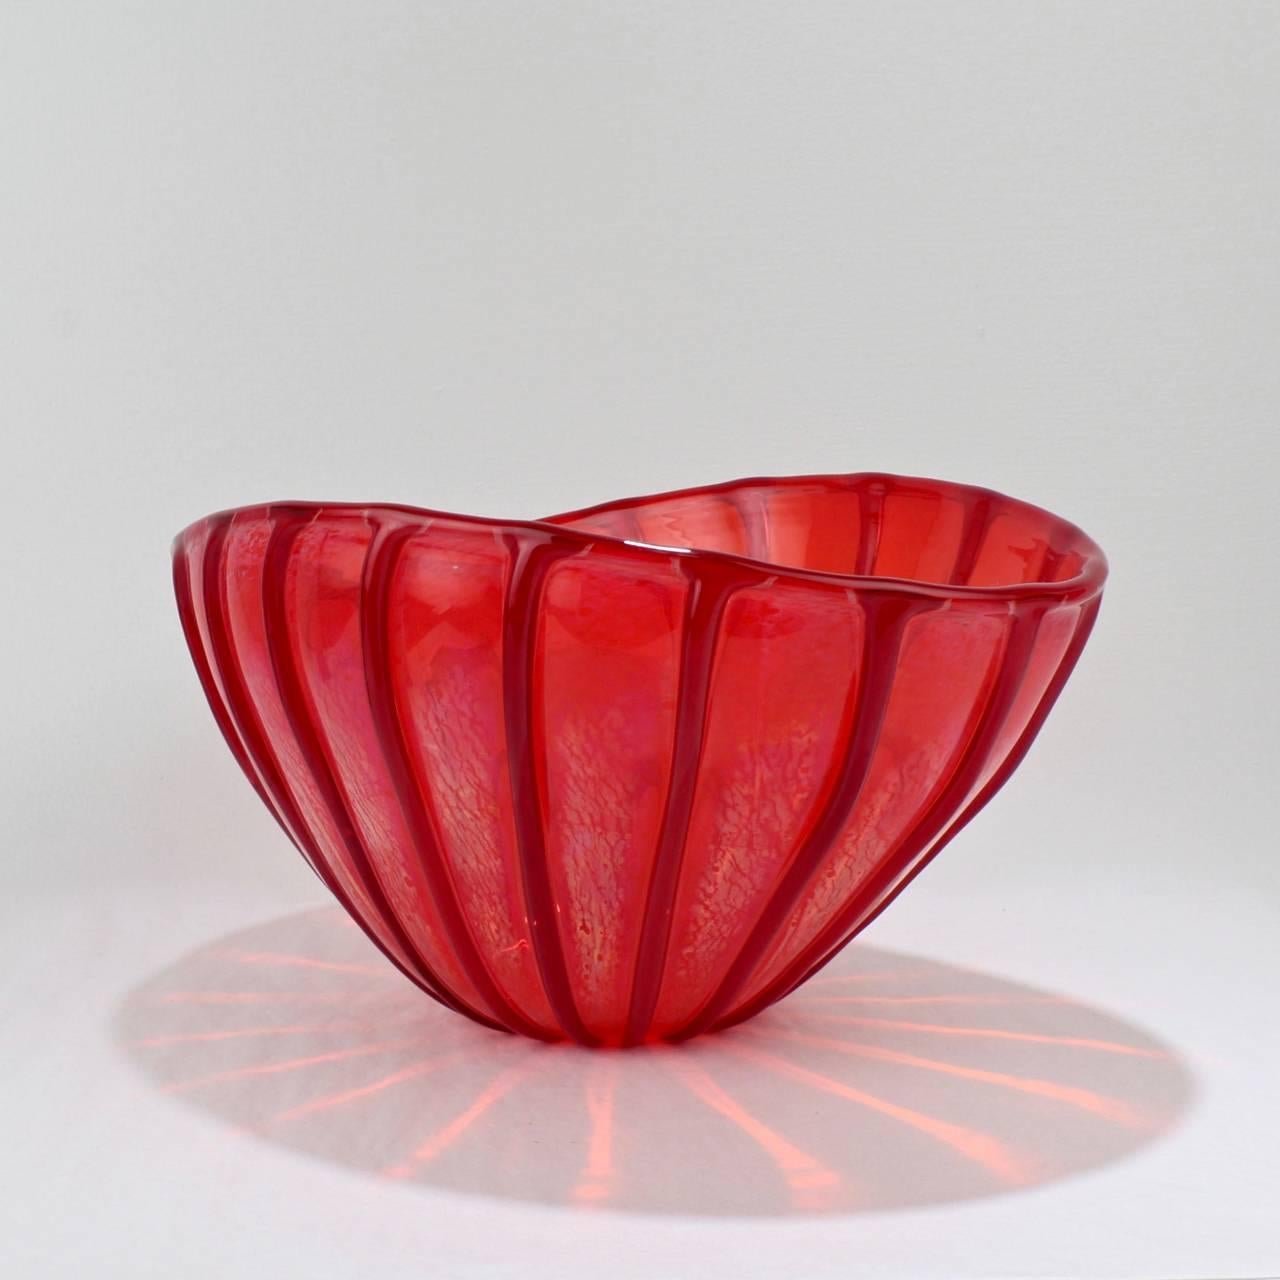 Italian Seguso Viro Limited Edition Nuance Collection Red Murano Glass Vase or Bowl